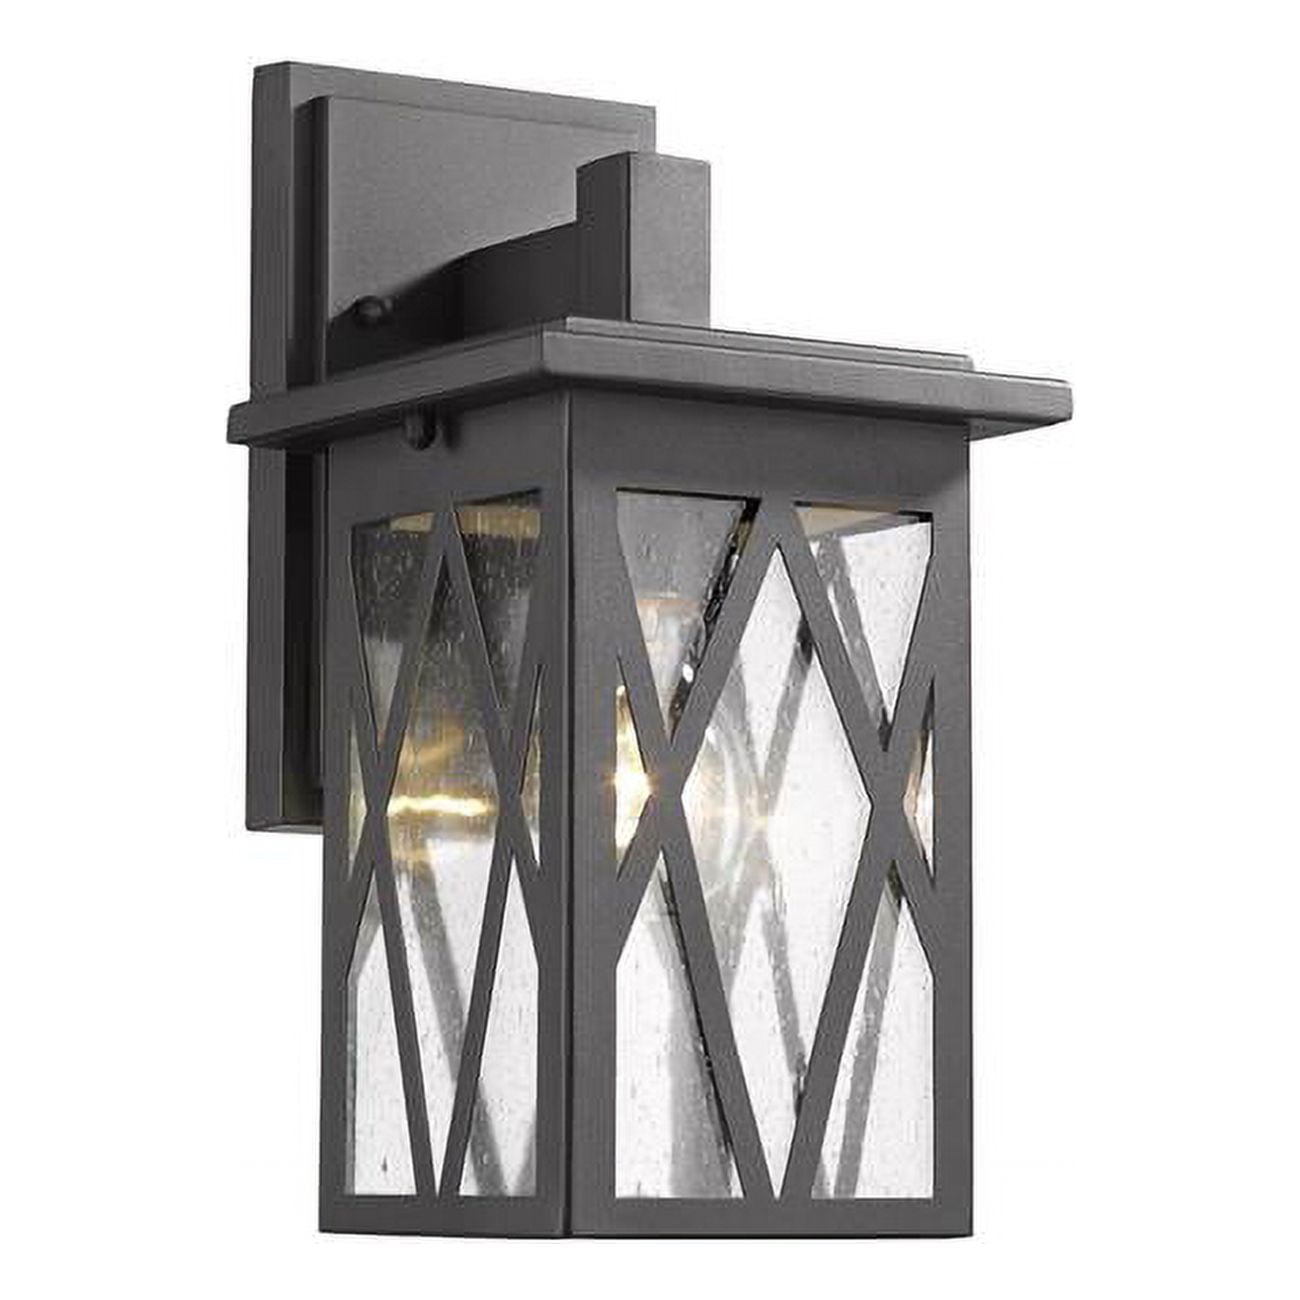 Ch2s080bk12-od1 Anthony Transitional 1 Light Textured Black Outdoor Wall Sconce - 12 In.